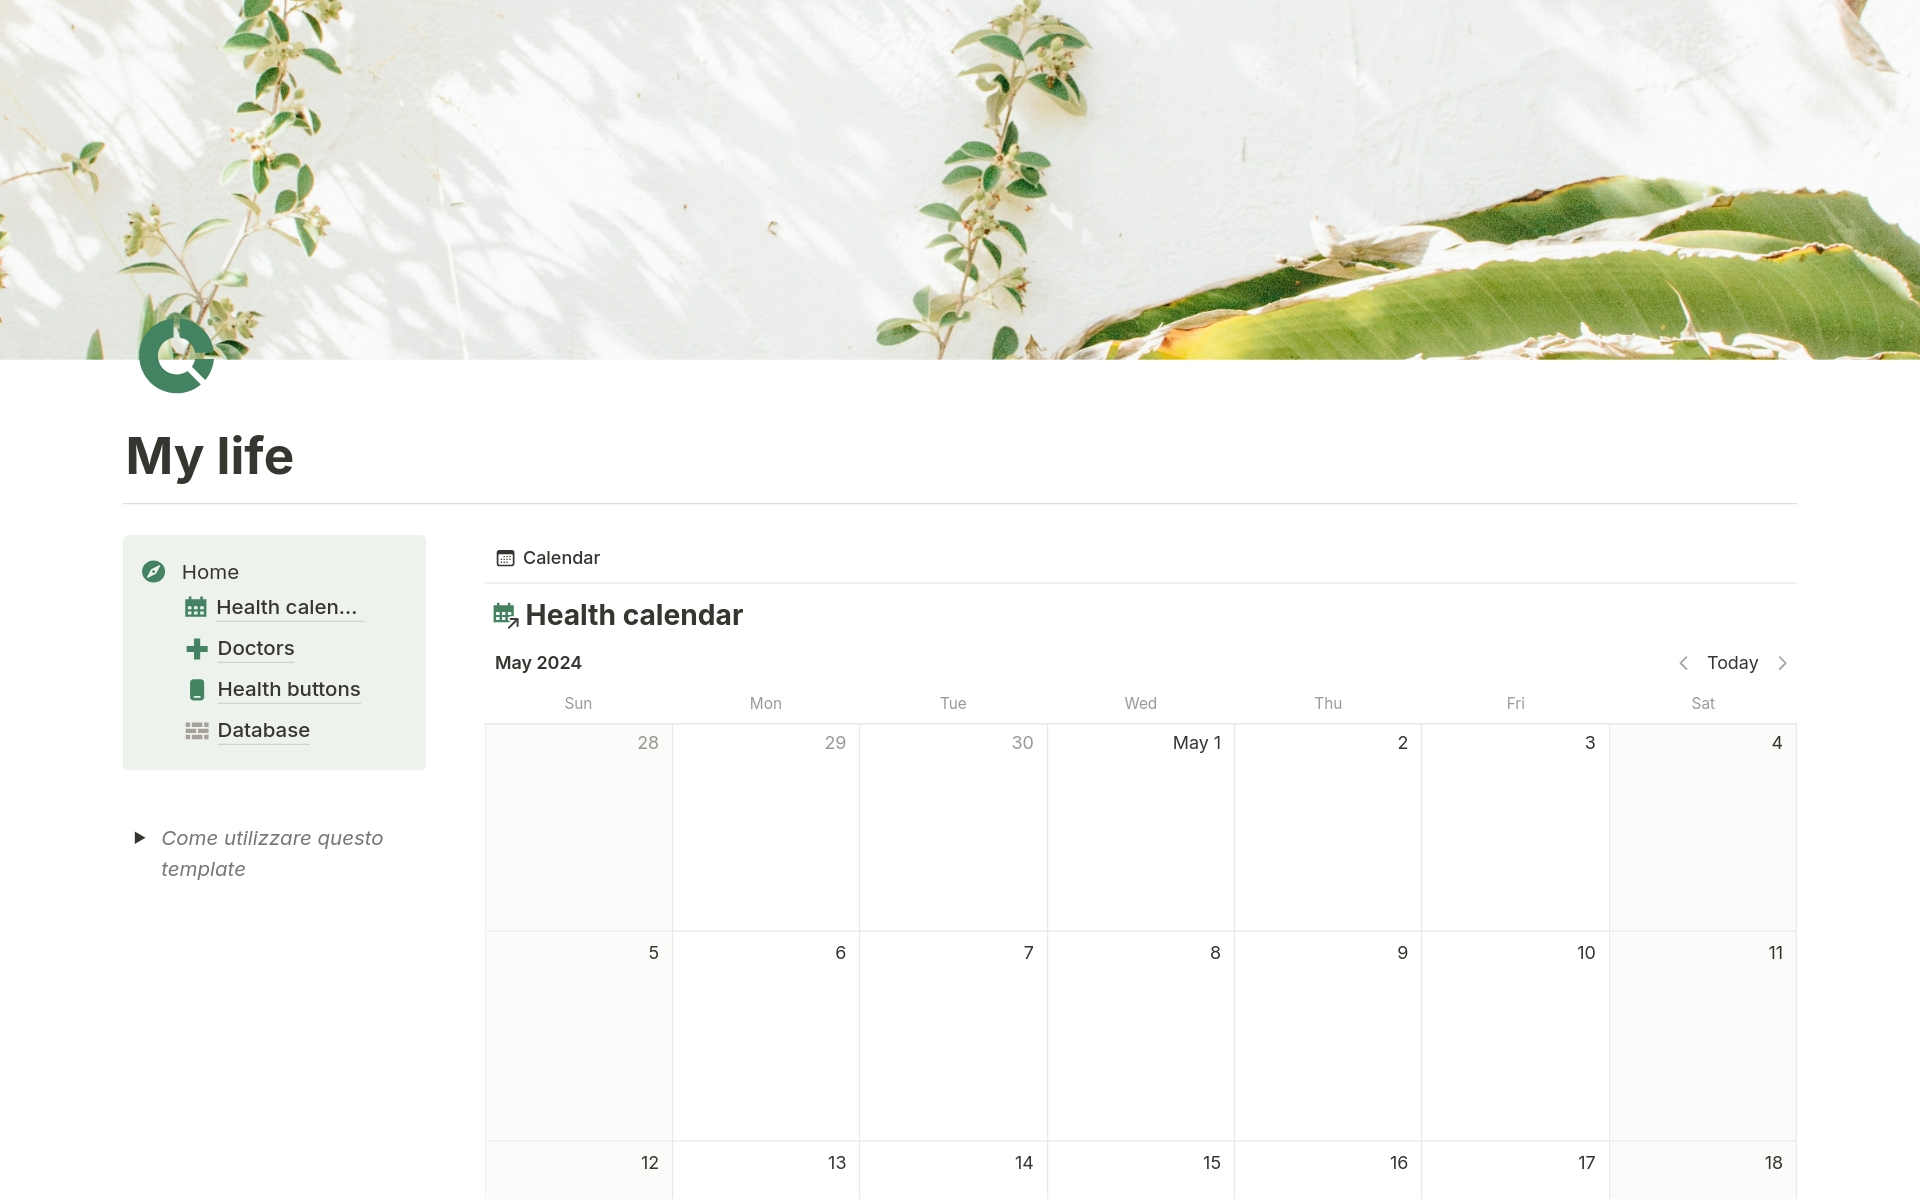 This template will help you track your life and view annual summaries. It will assist in keeping track of your health, women's cycle, mood, physical condition, and illnesses.